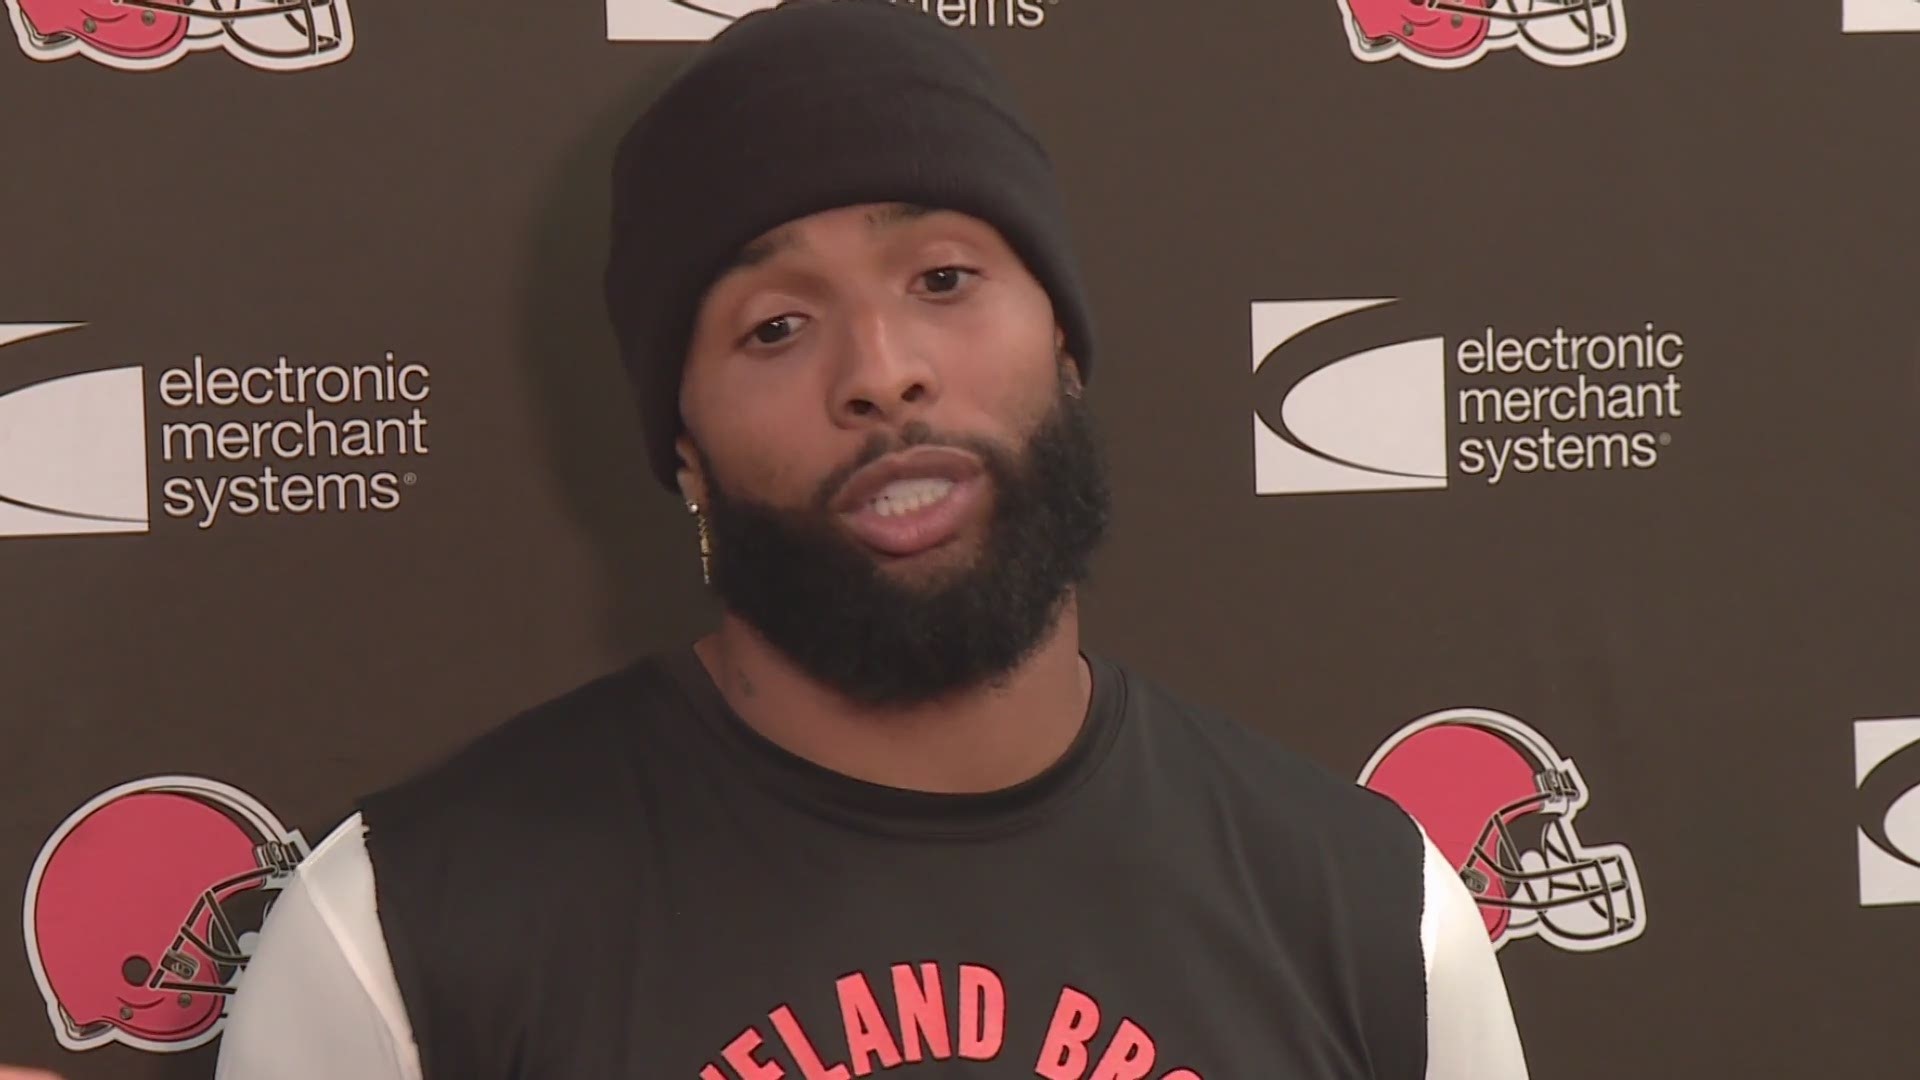 Odell Beckham Jr. says he's not bothered by only catching two passes in Cleveland's 40-25 win over the Ravens. "I just want to get back to the playoffs," he said.